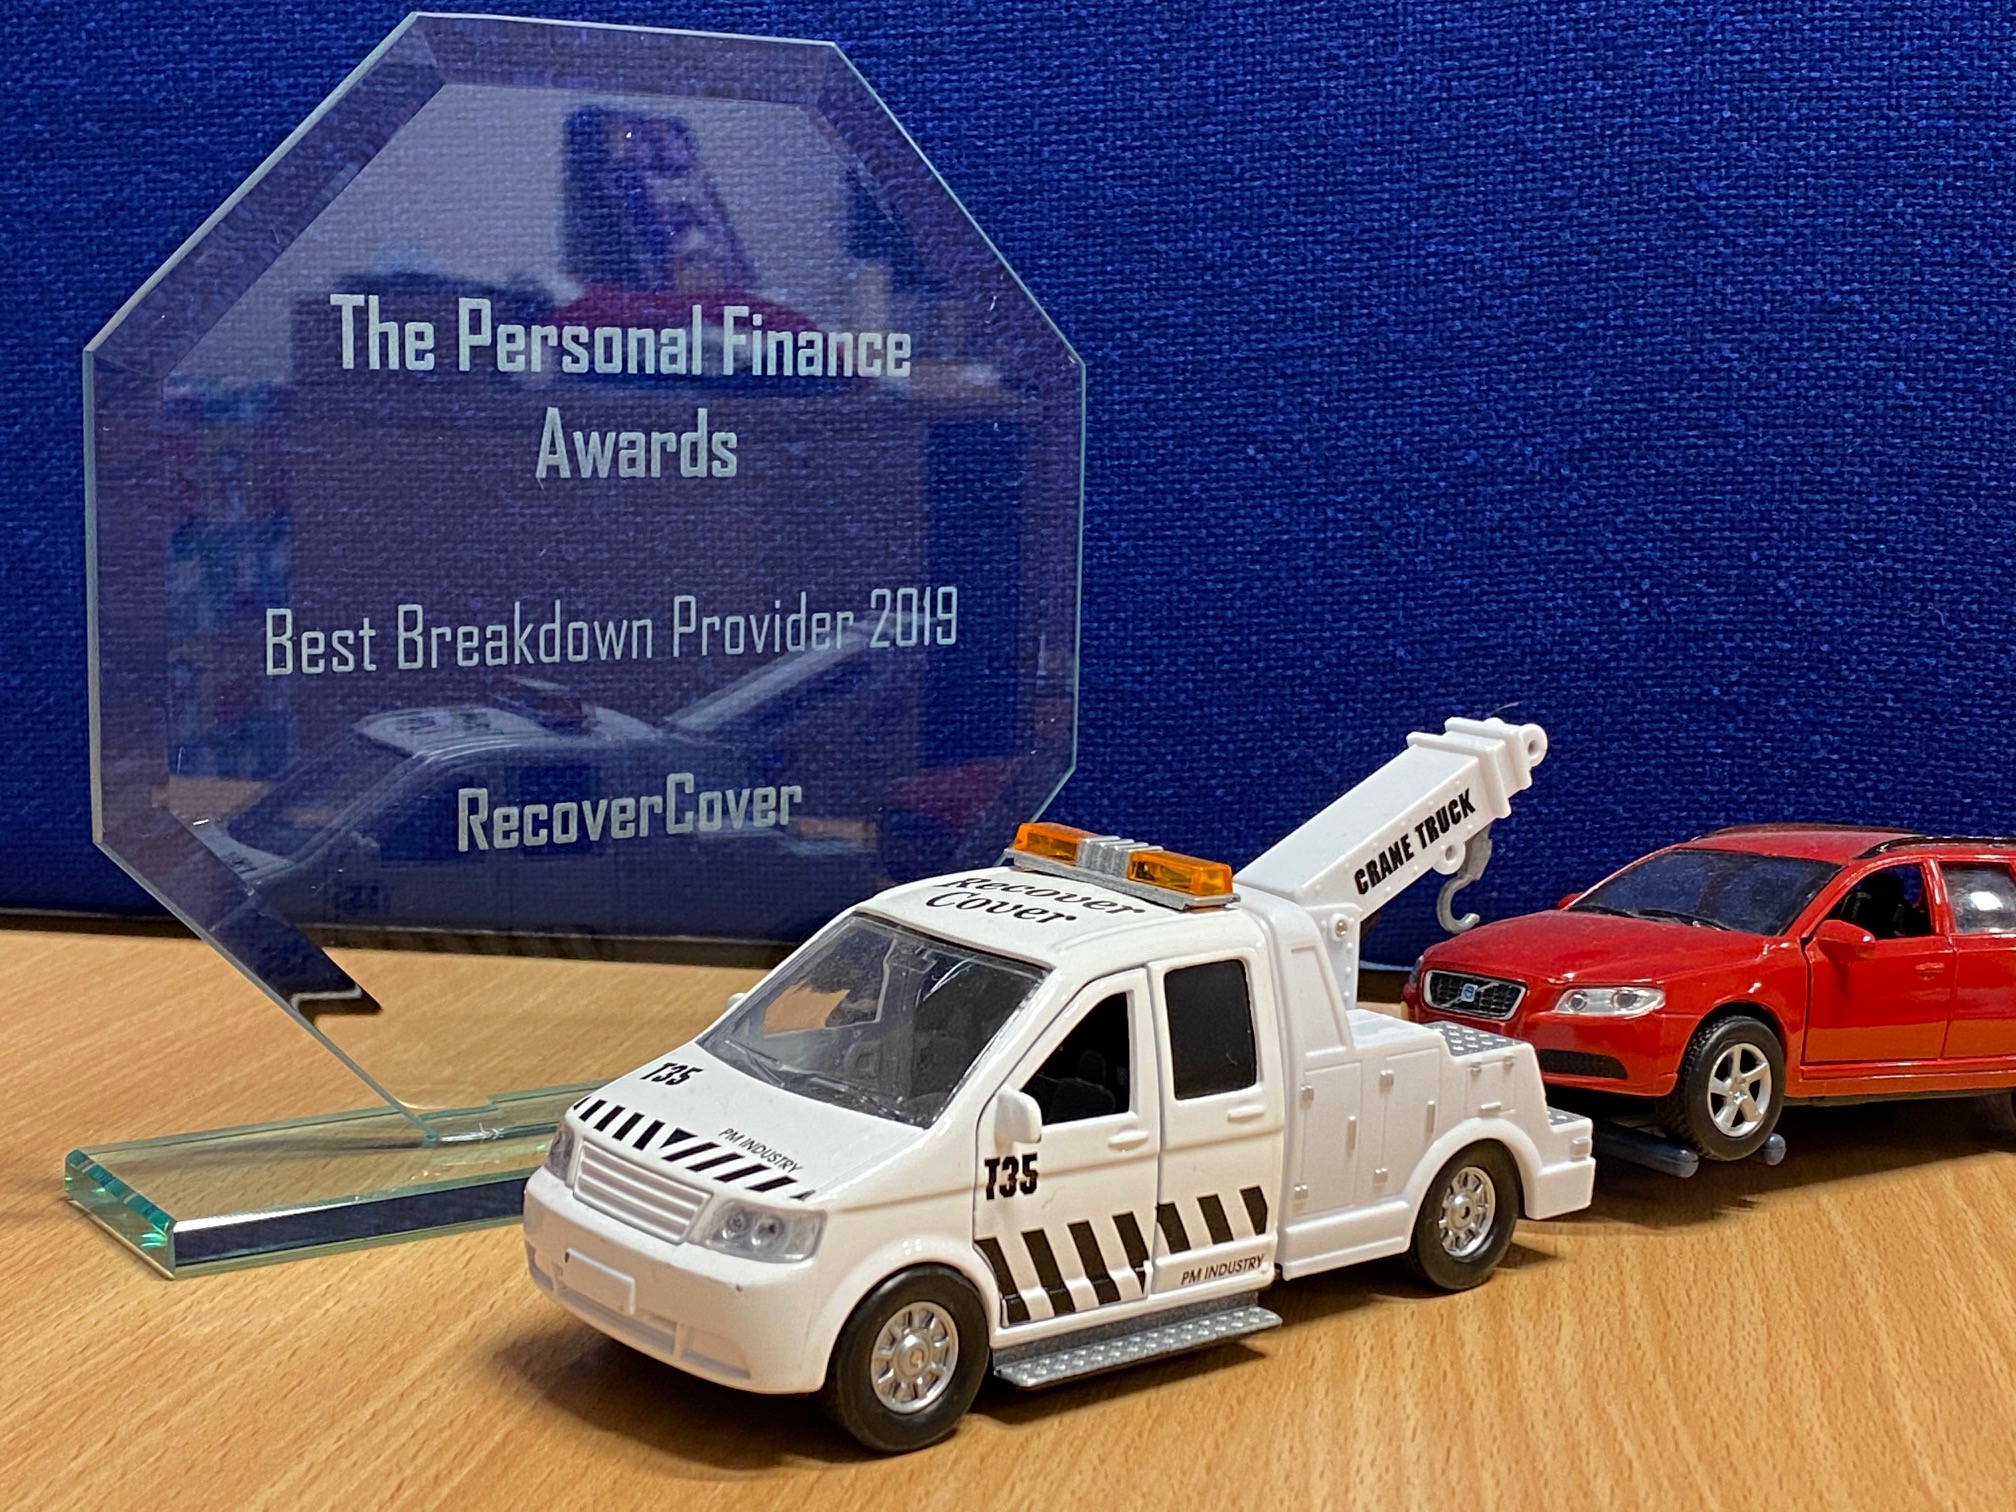 The Business Centre (Cardiff) Ltd Clients RecoverCover best breakdown provider 2019